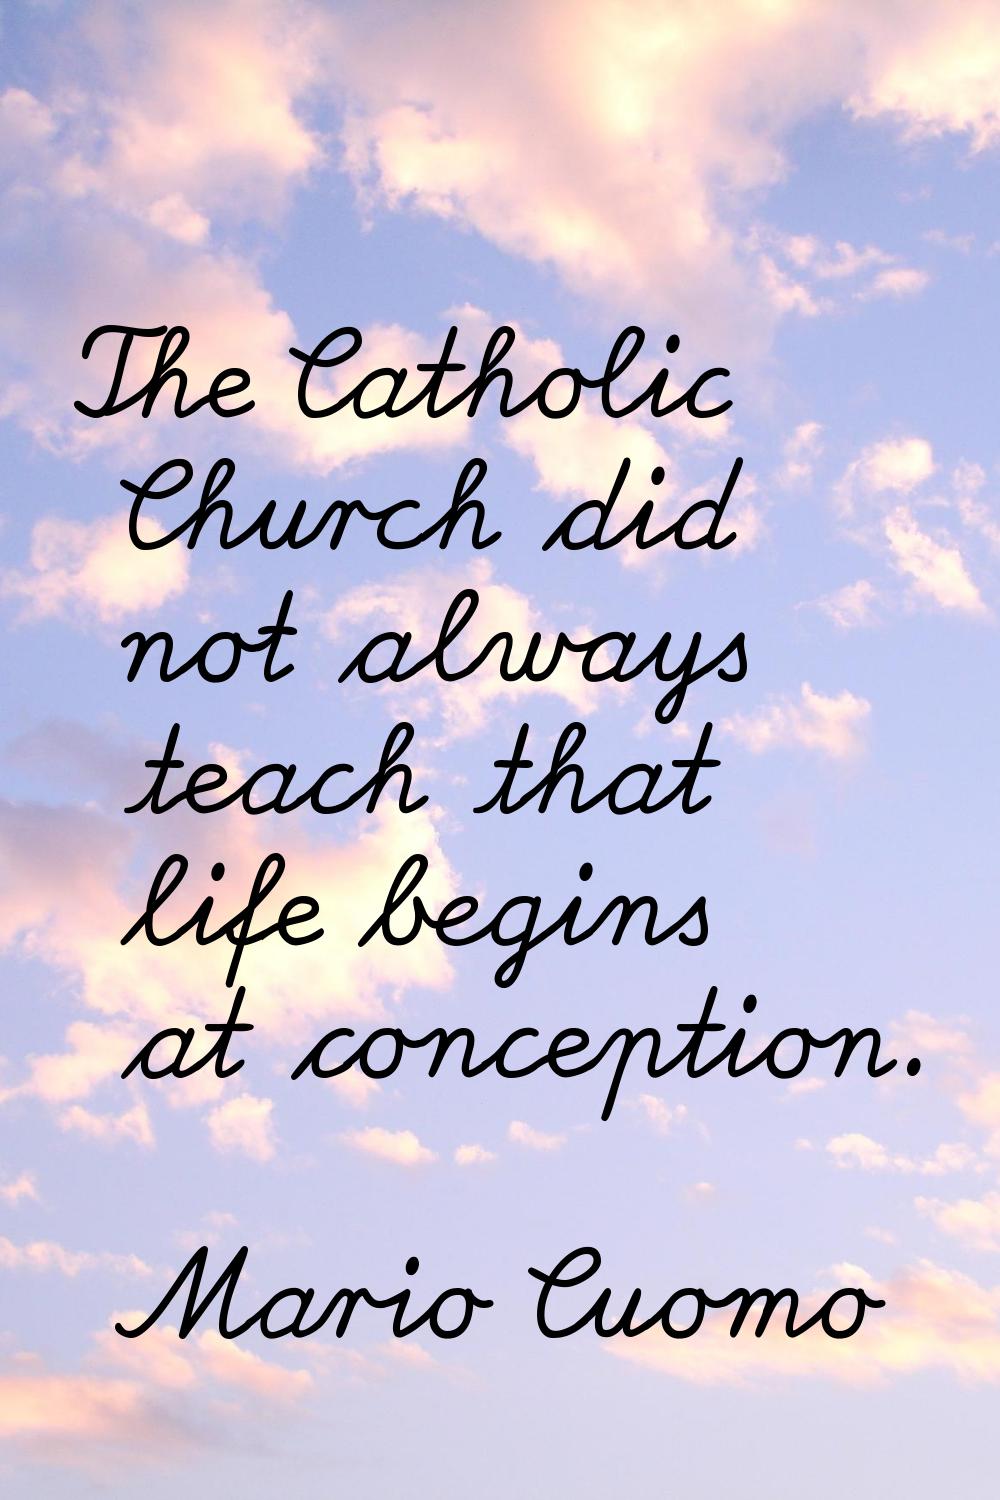 The Catholic Church did not always teach that life begins at conception.